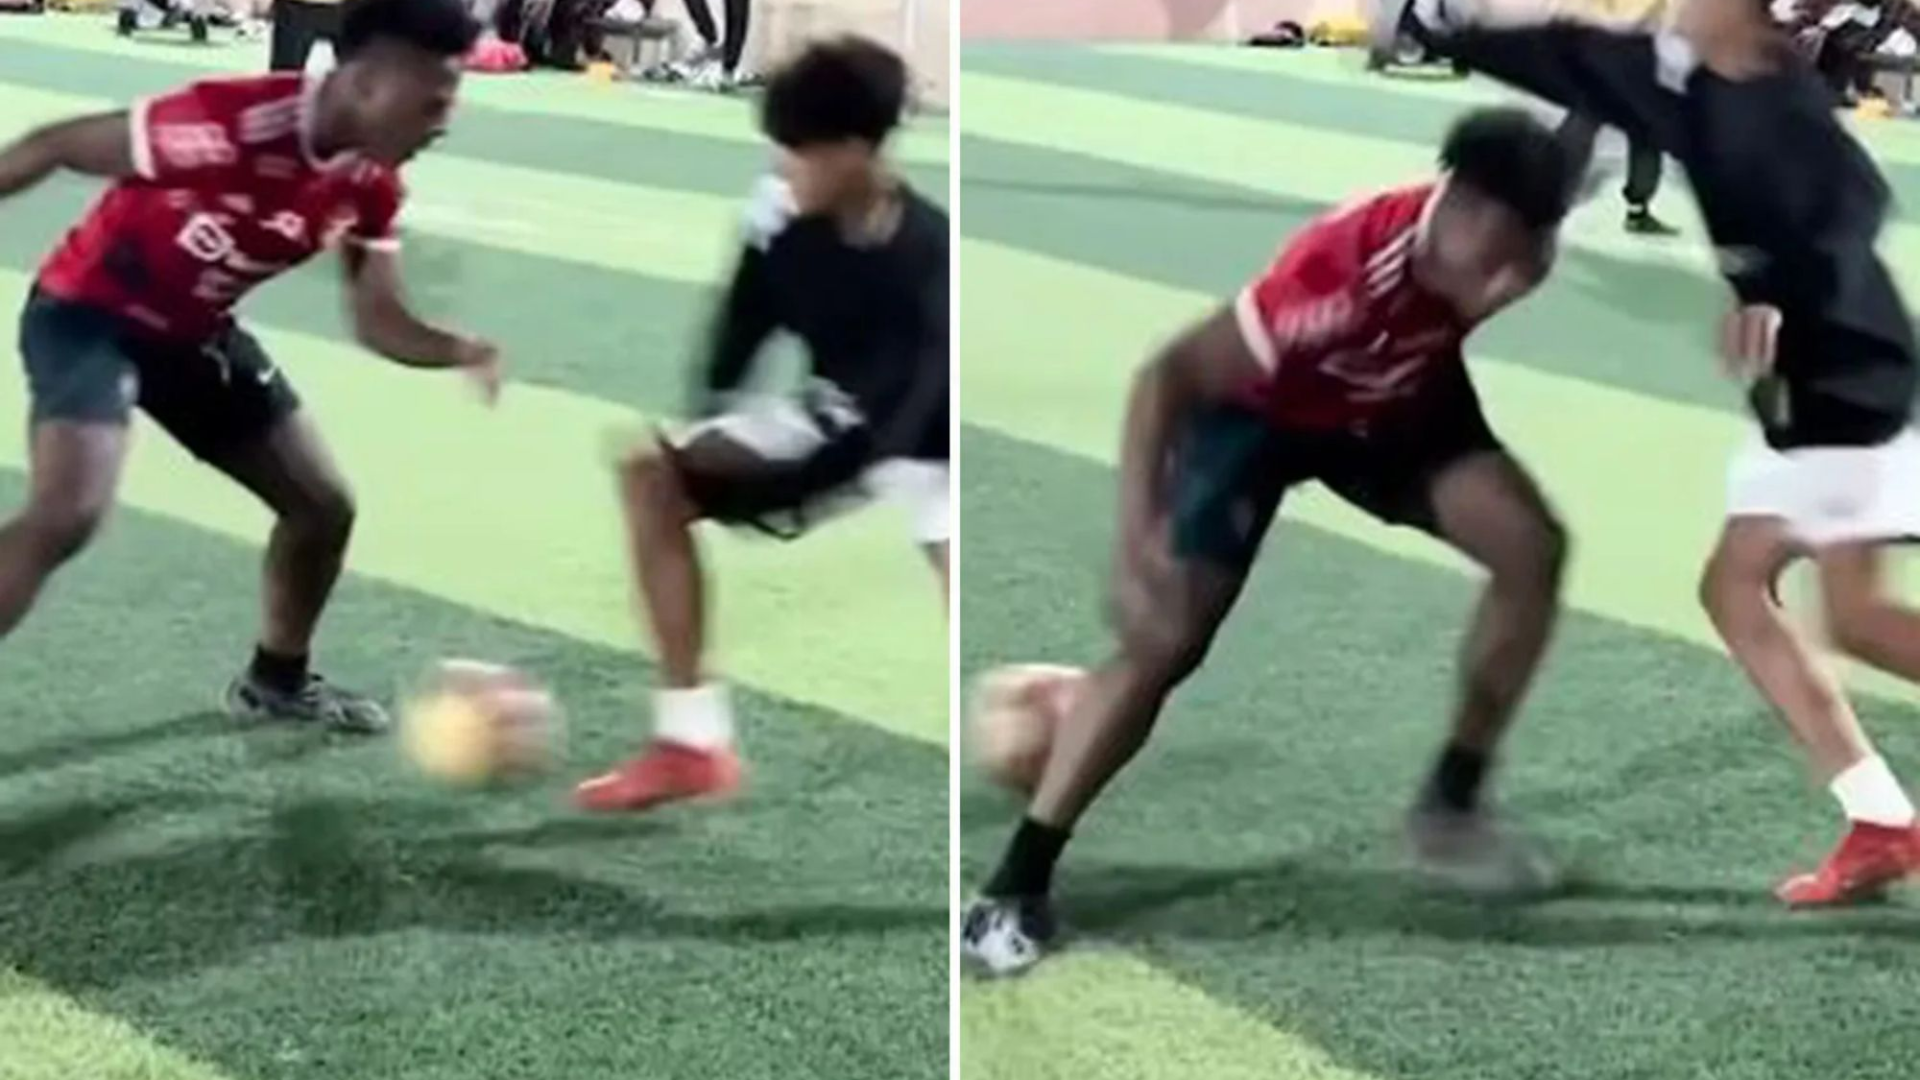 Ronaldo’s son Cristiano Jr. disgraces IShowSpeed as he nutmeg him twice in a football match